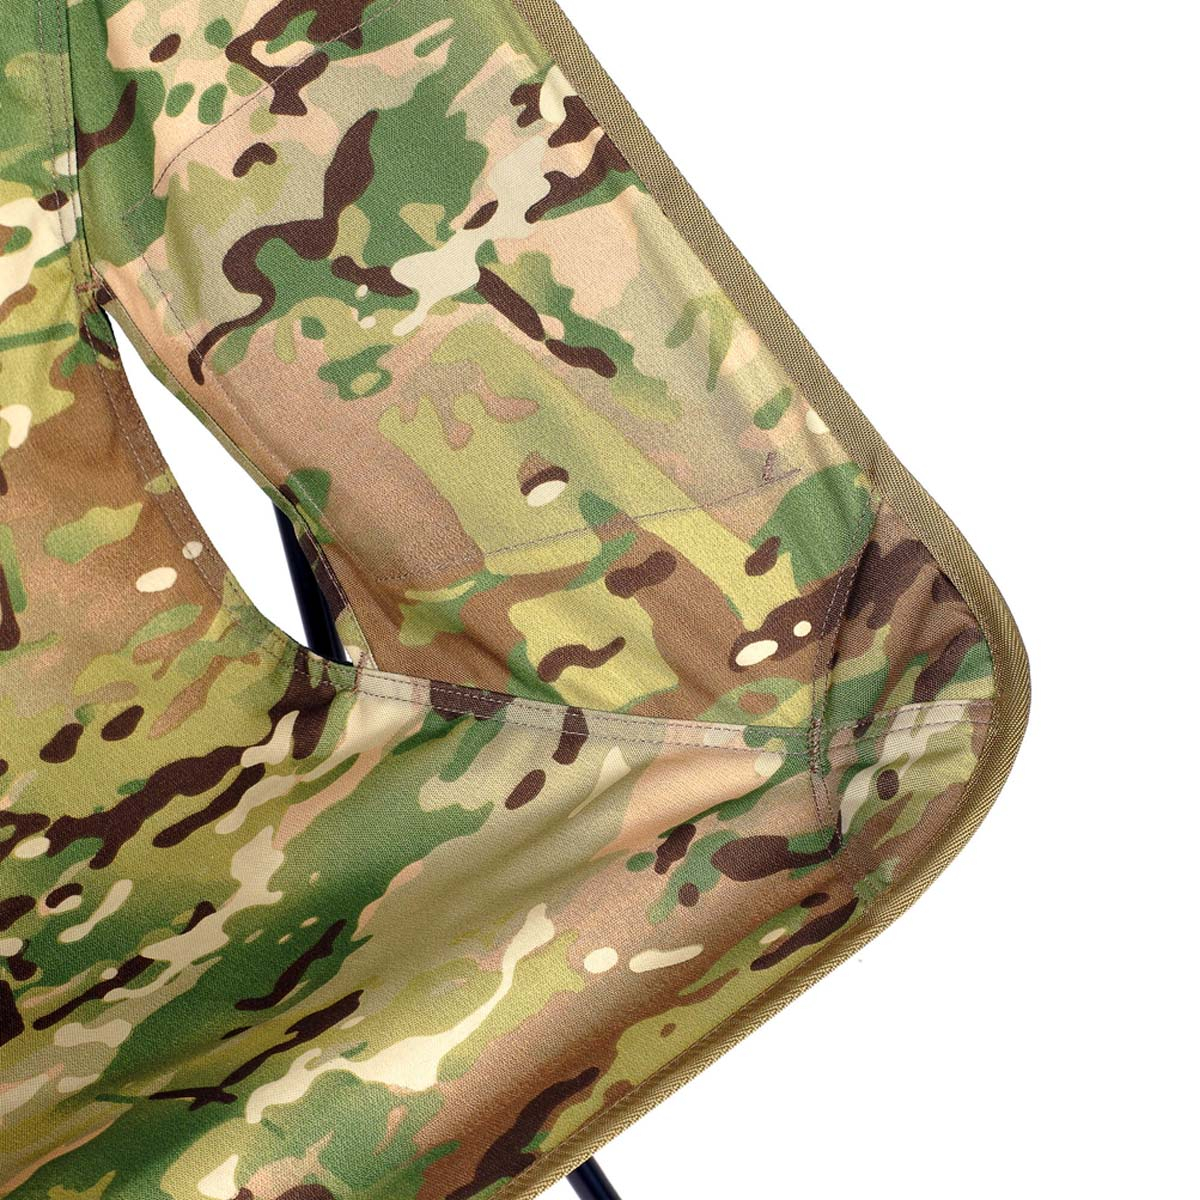 Helinox Tactical Chair One MultiCam fabric, bluesign®-certified and recycled 600D polyester